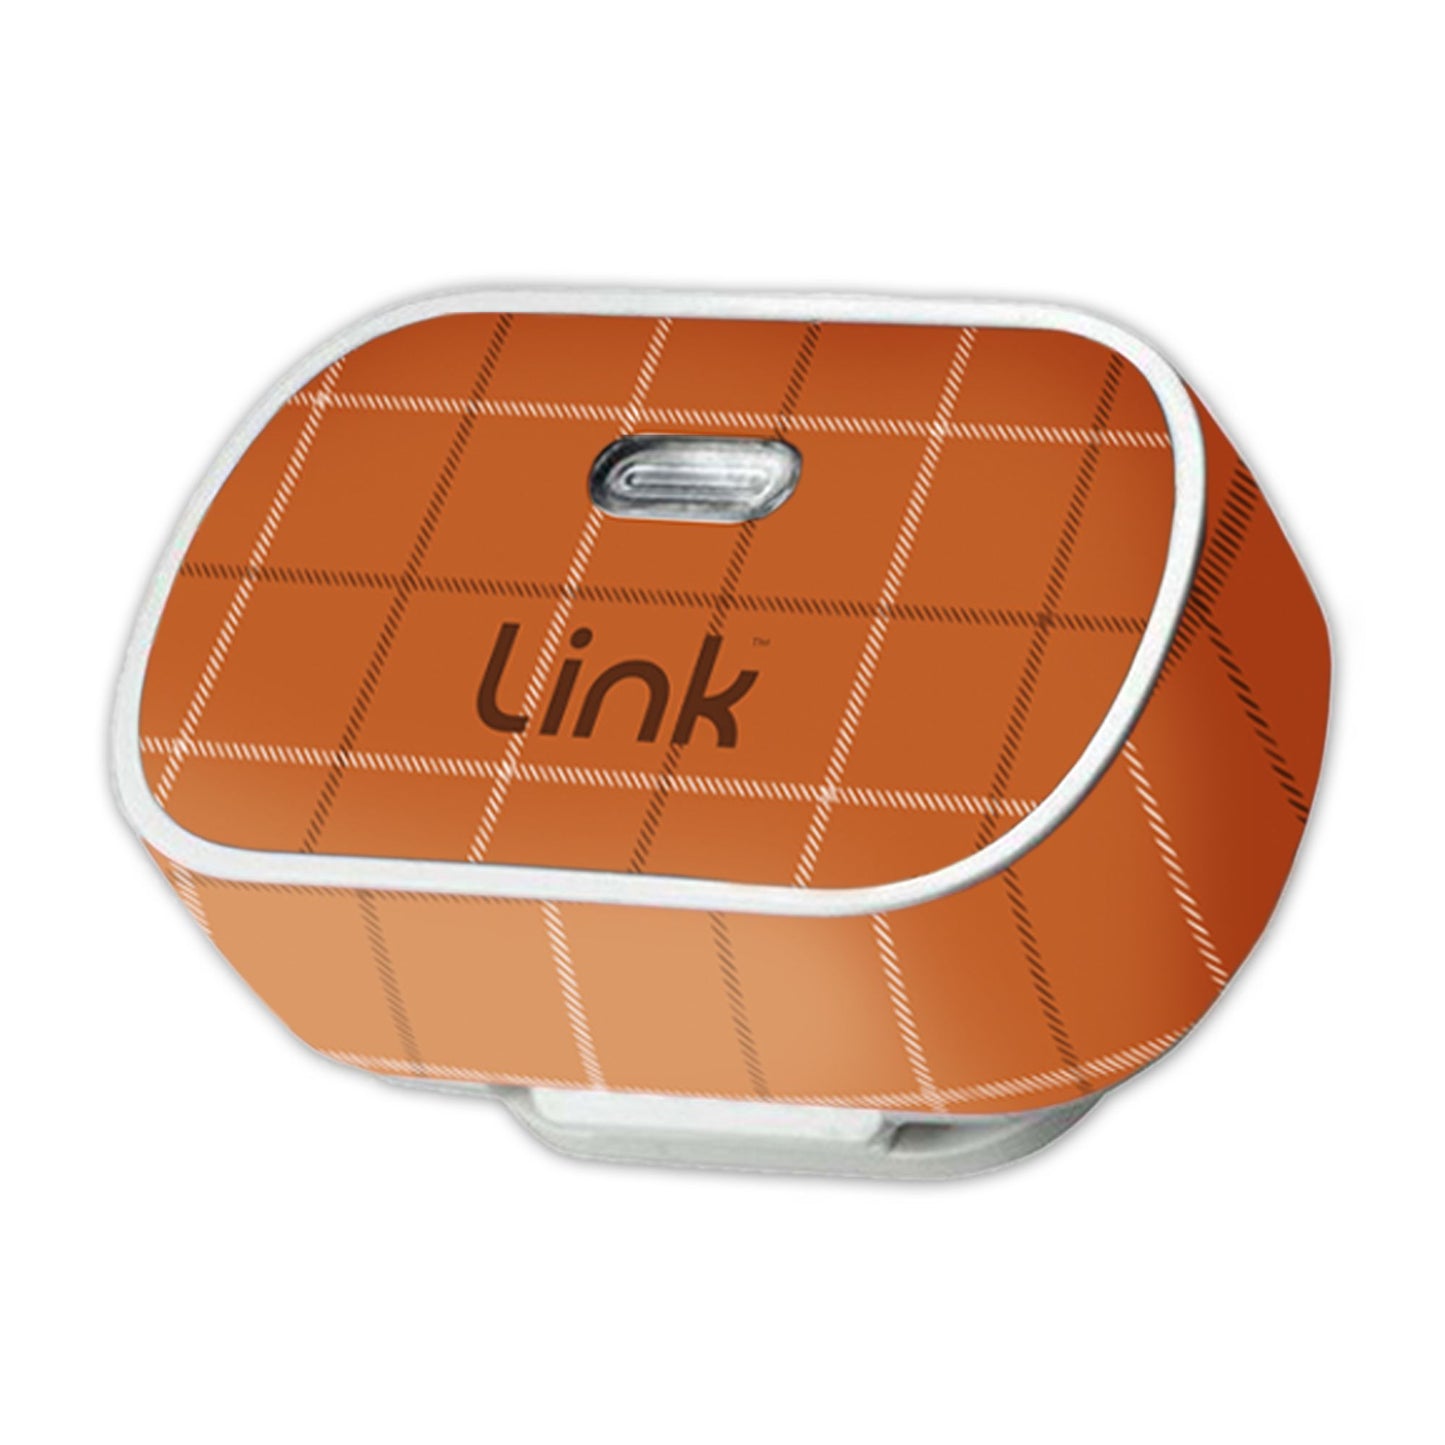 The Link Wrap